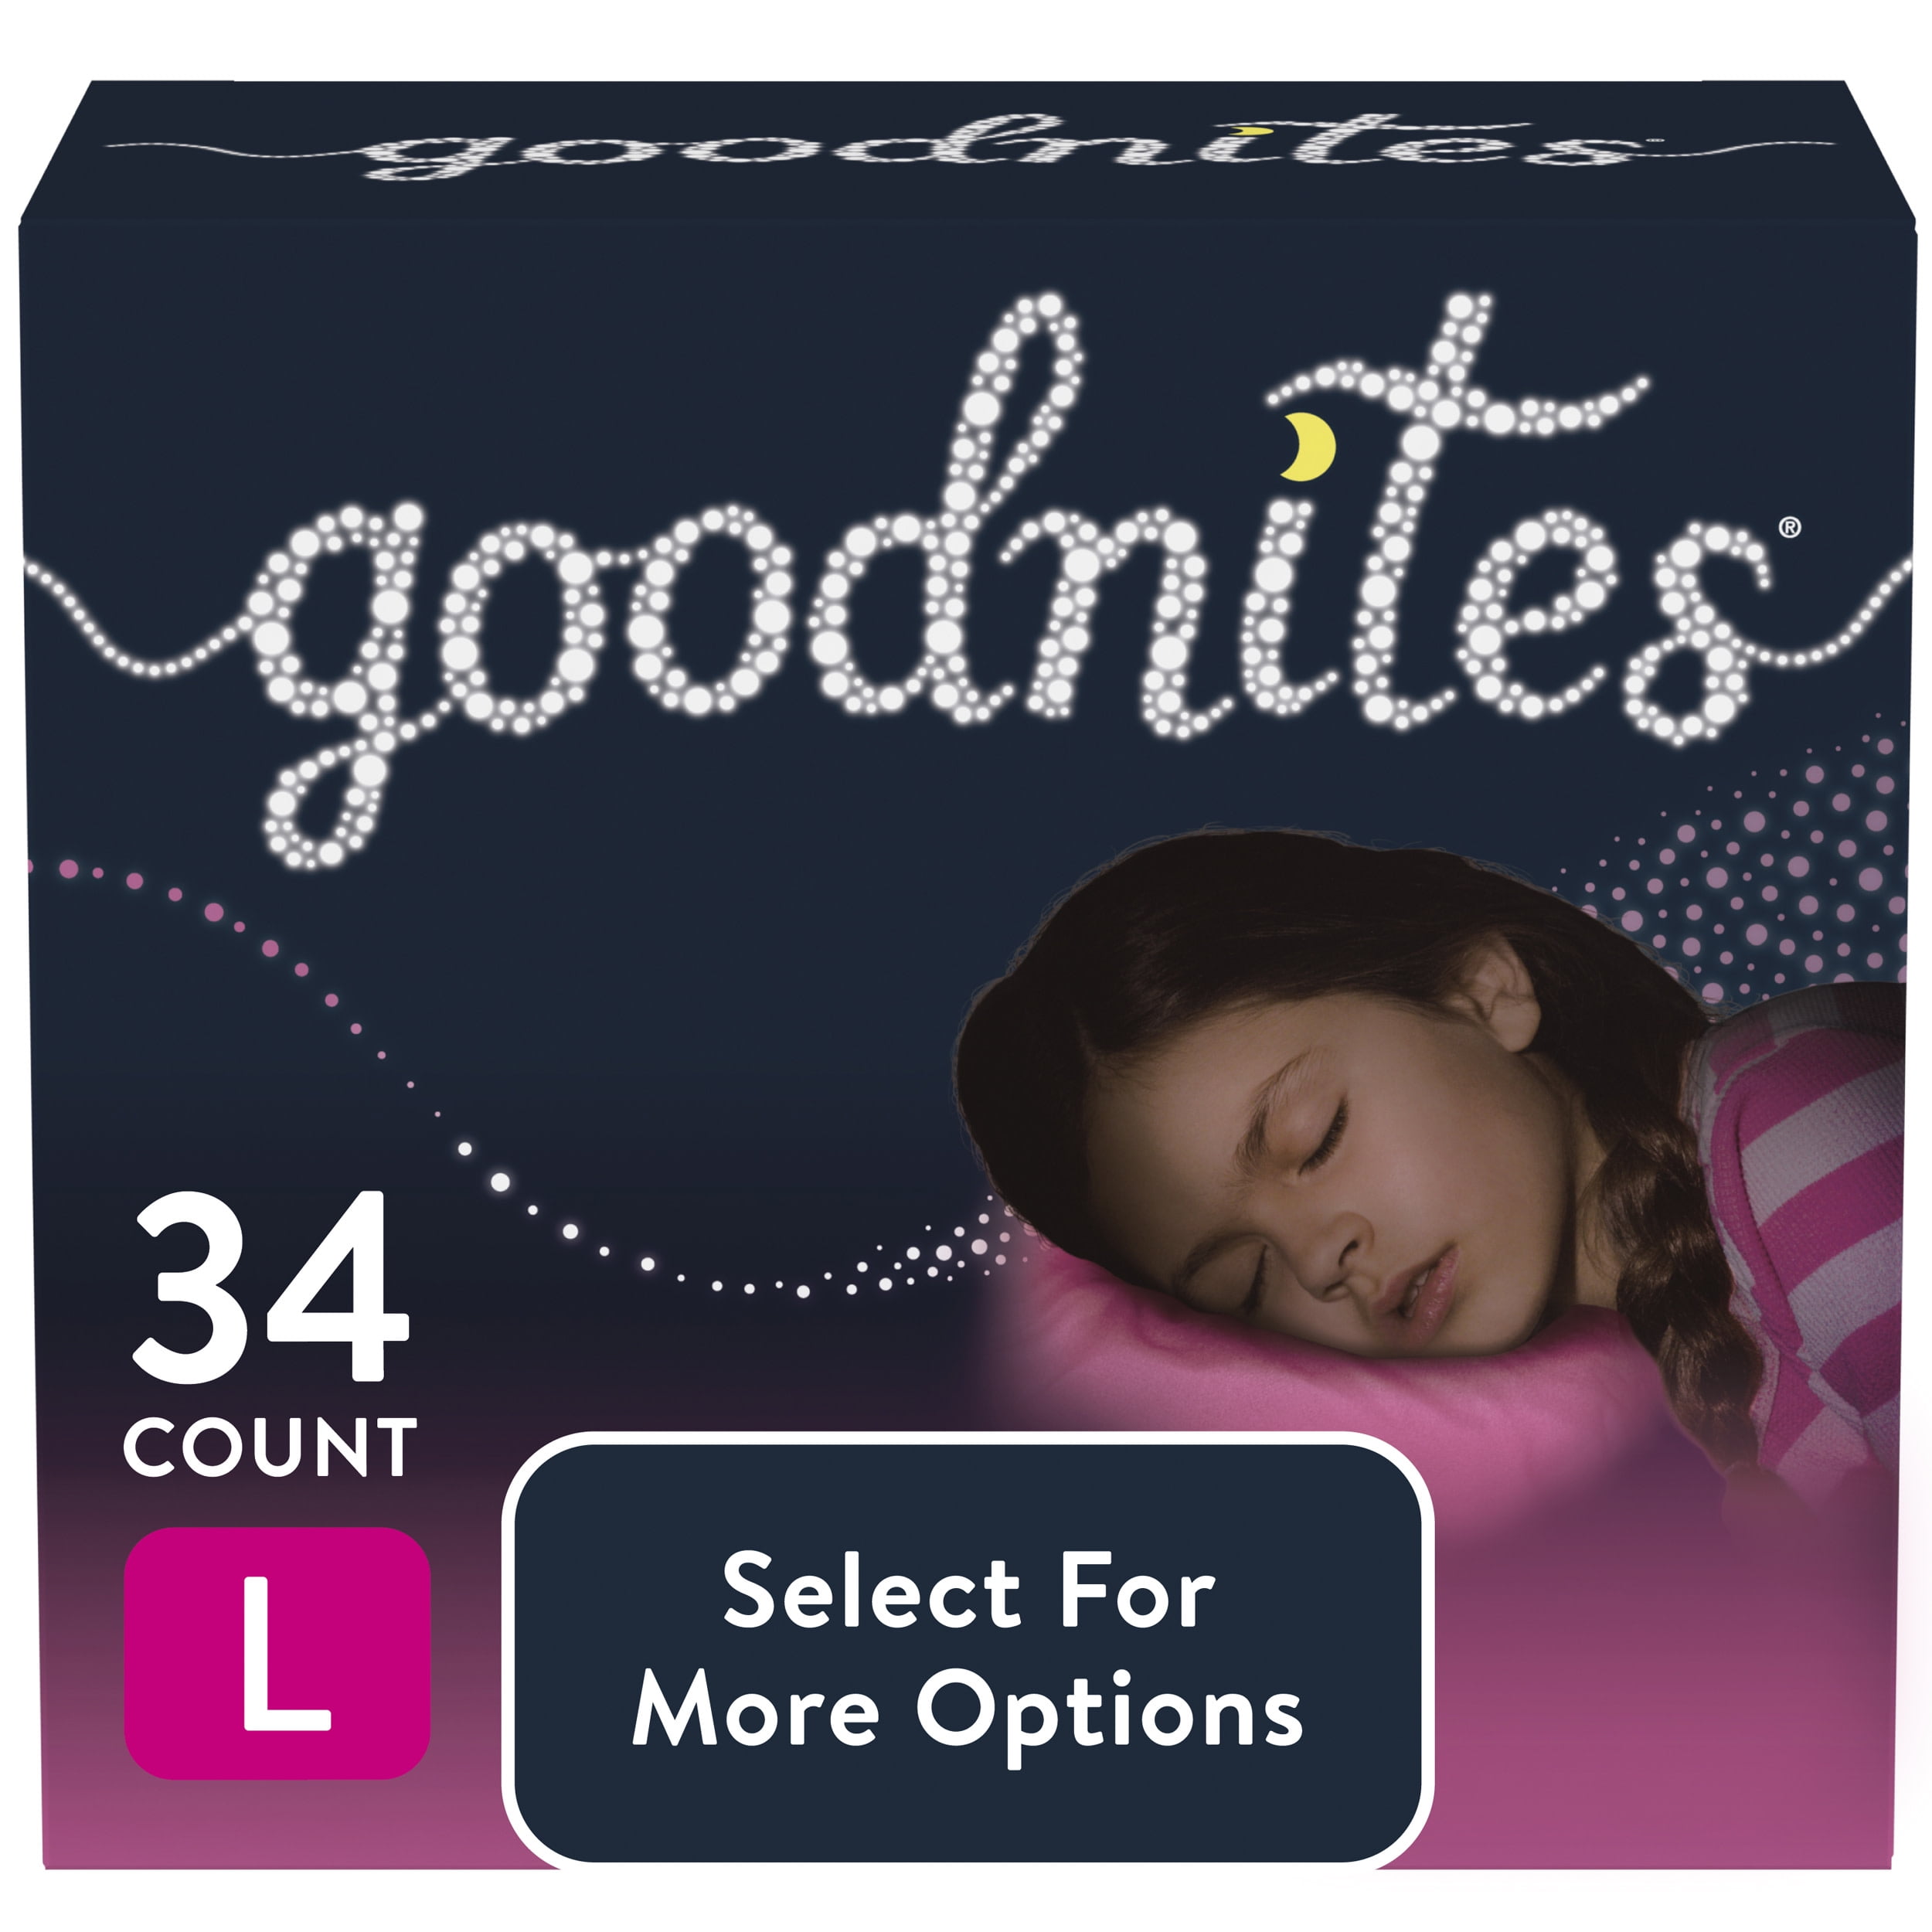 Sleeping Girl Plumber Xxx Video - Goodnites Overnight Underwear for Girls, XL, 9 Ct (Select for More Options)  - Walmart.com